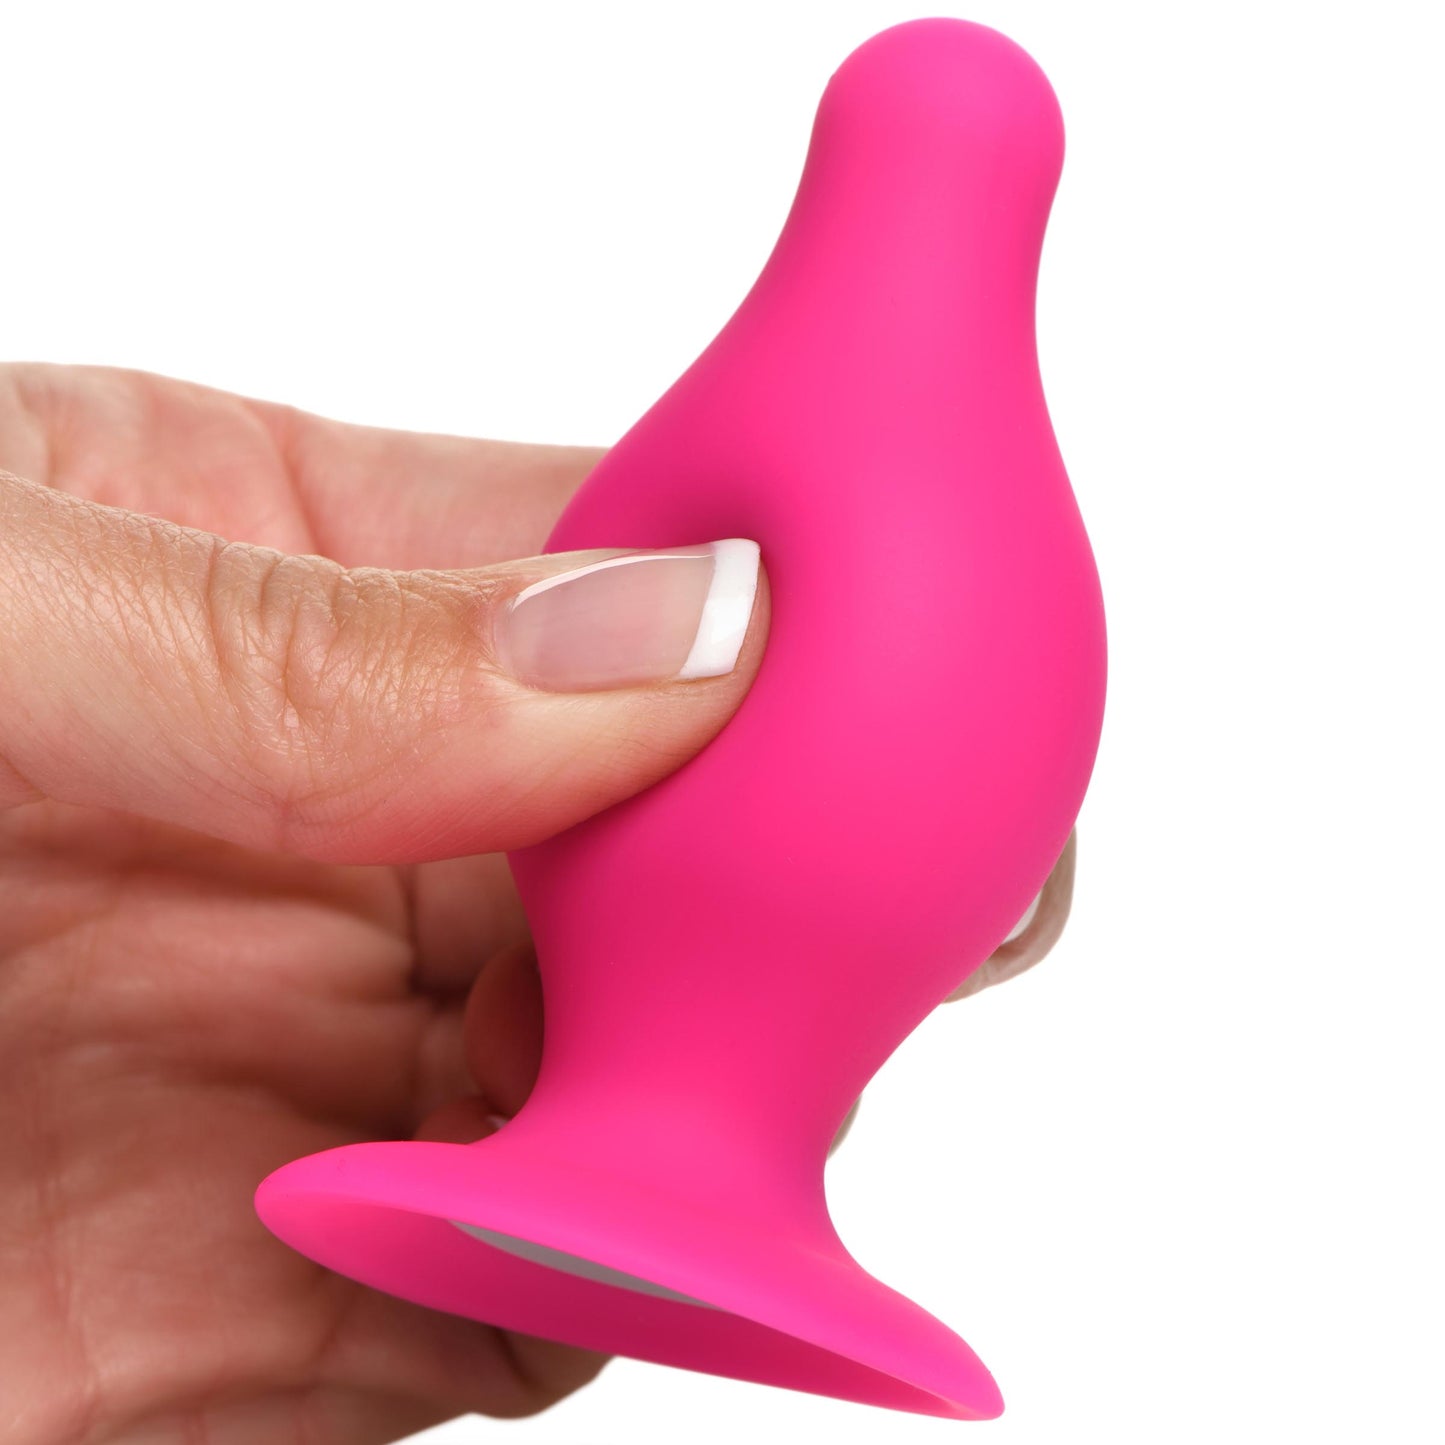 Squeezable Tapered Small Anal Plug - Pink